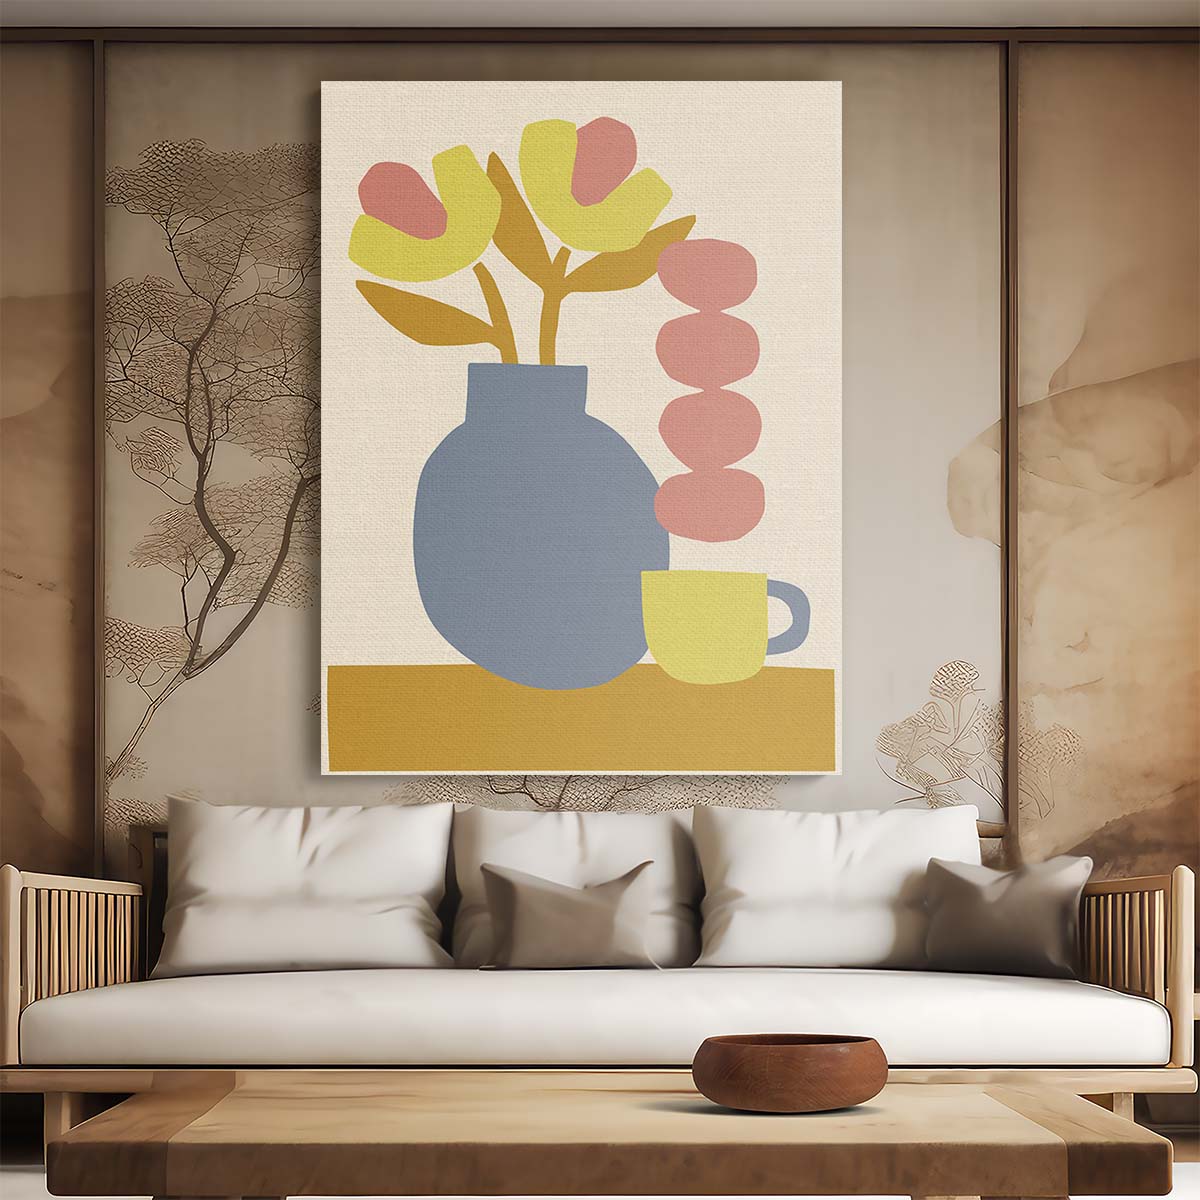 Pastel Floral Vase Illustration Wall Art by Margaux Fugier by Luxuriance Designs, made in USA